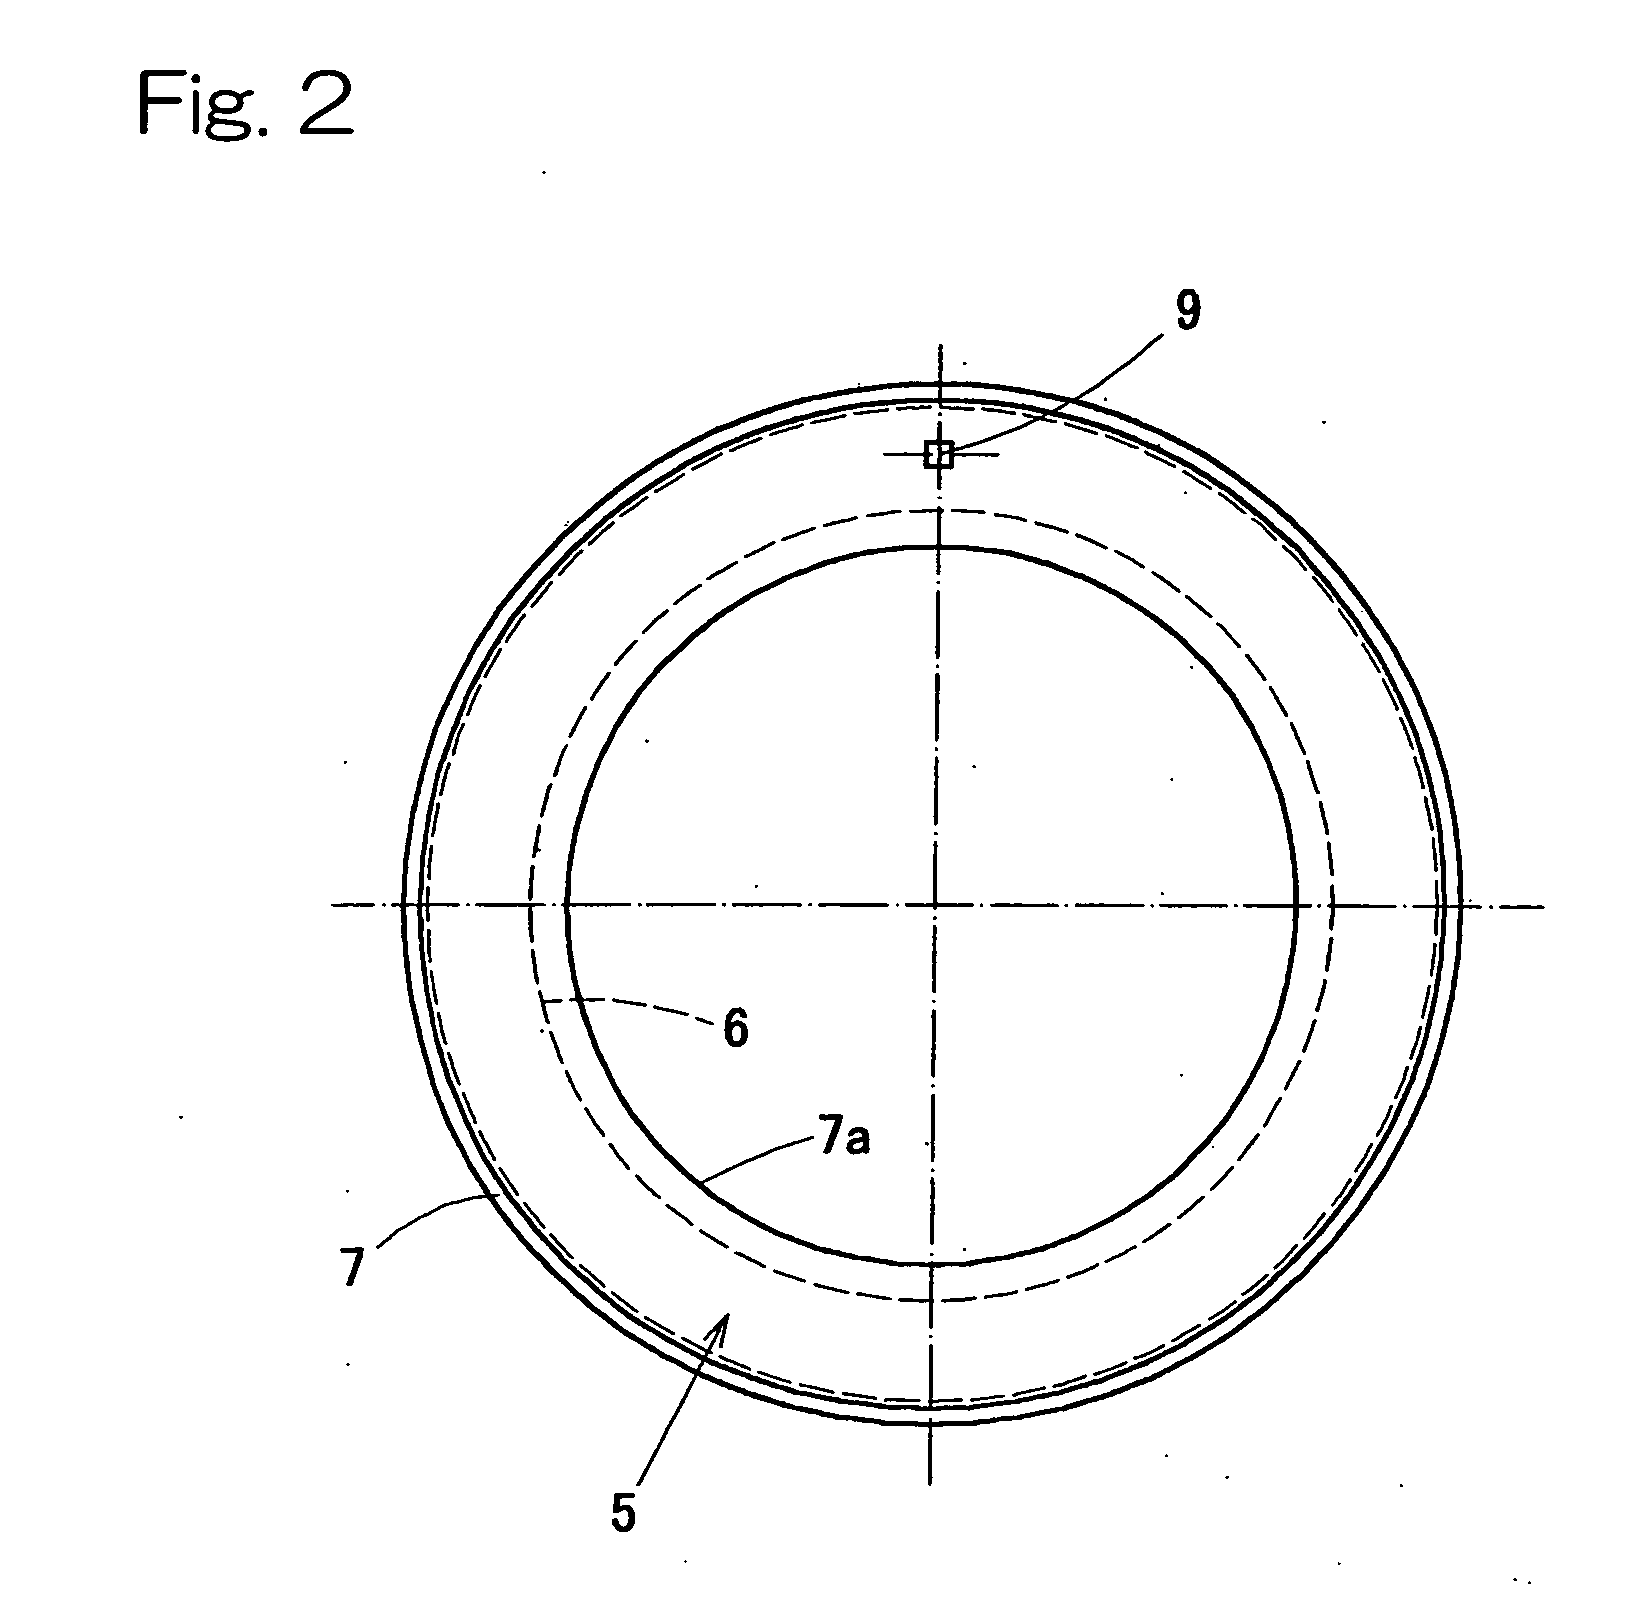 Bearing with ic tag and seal for the same